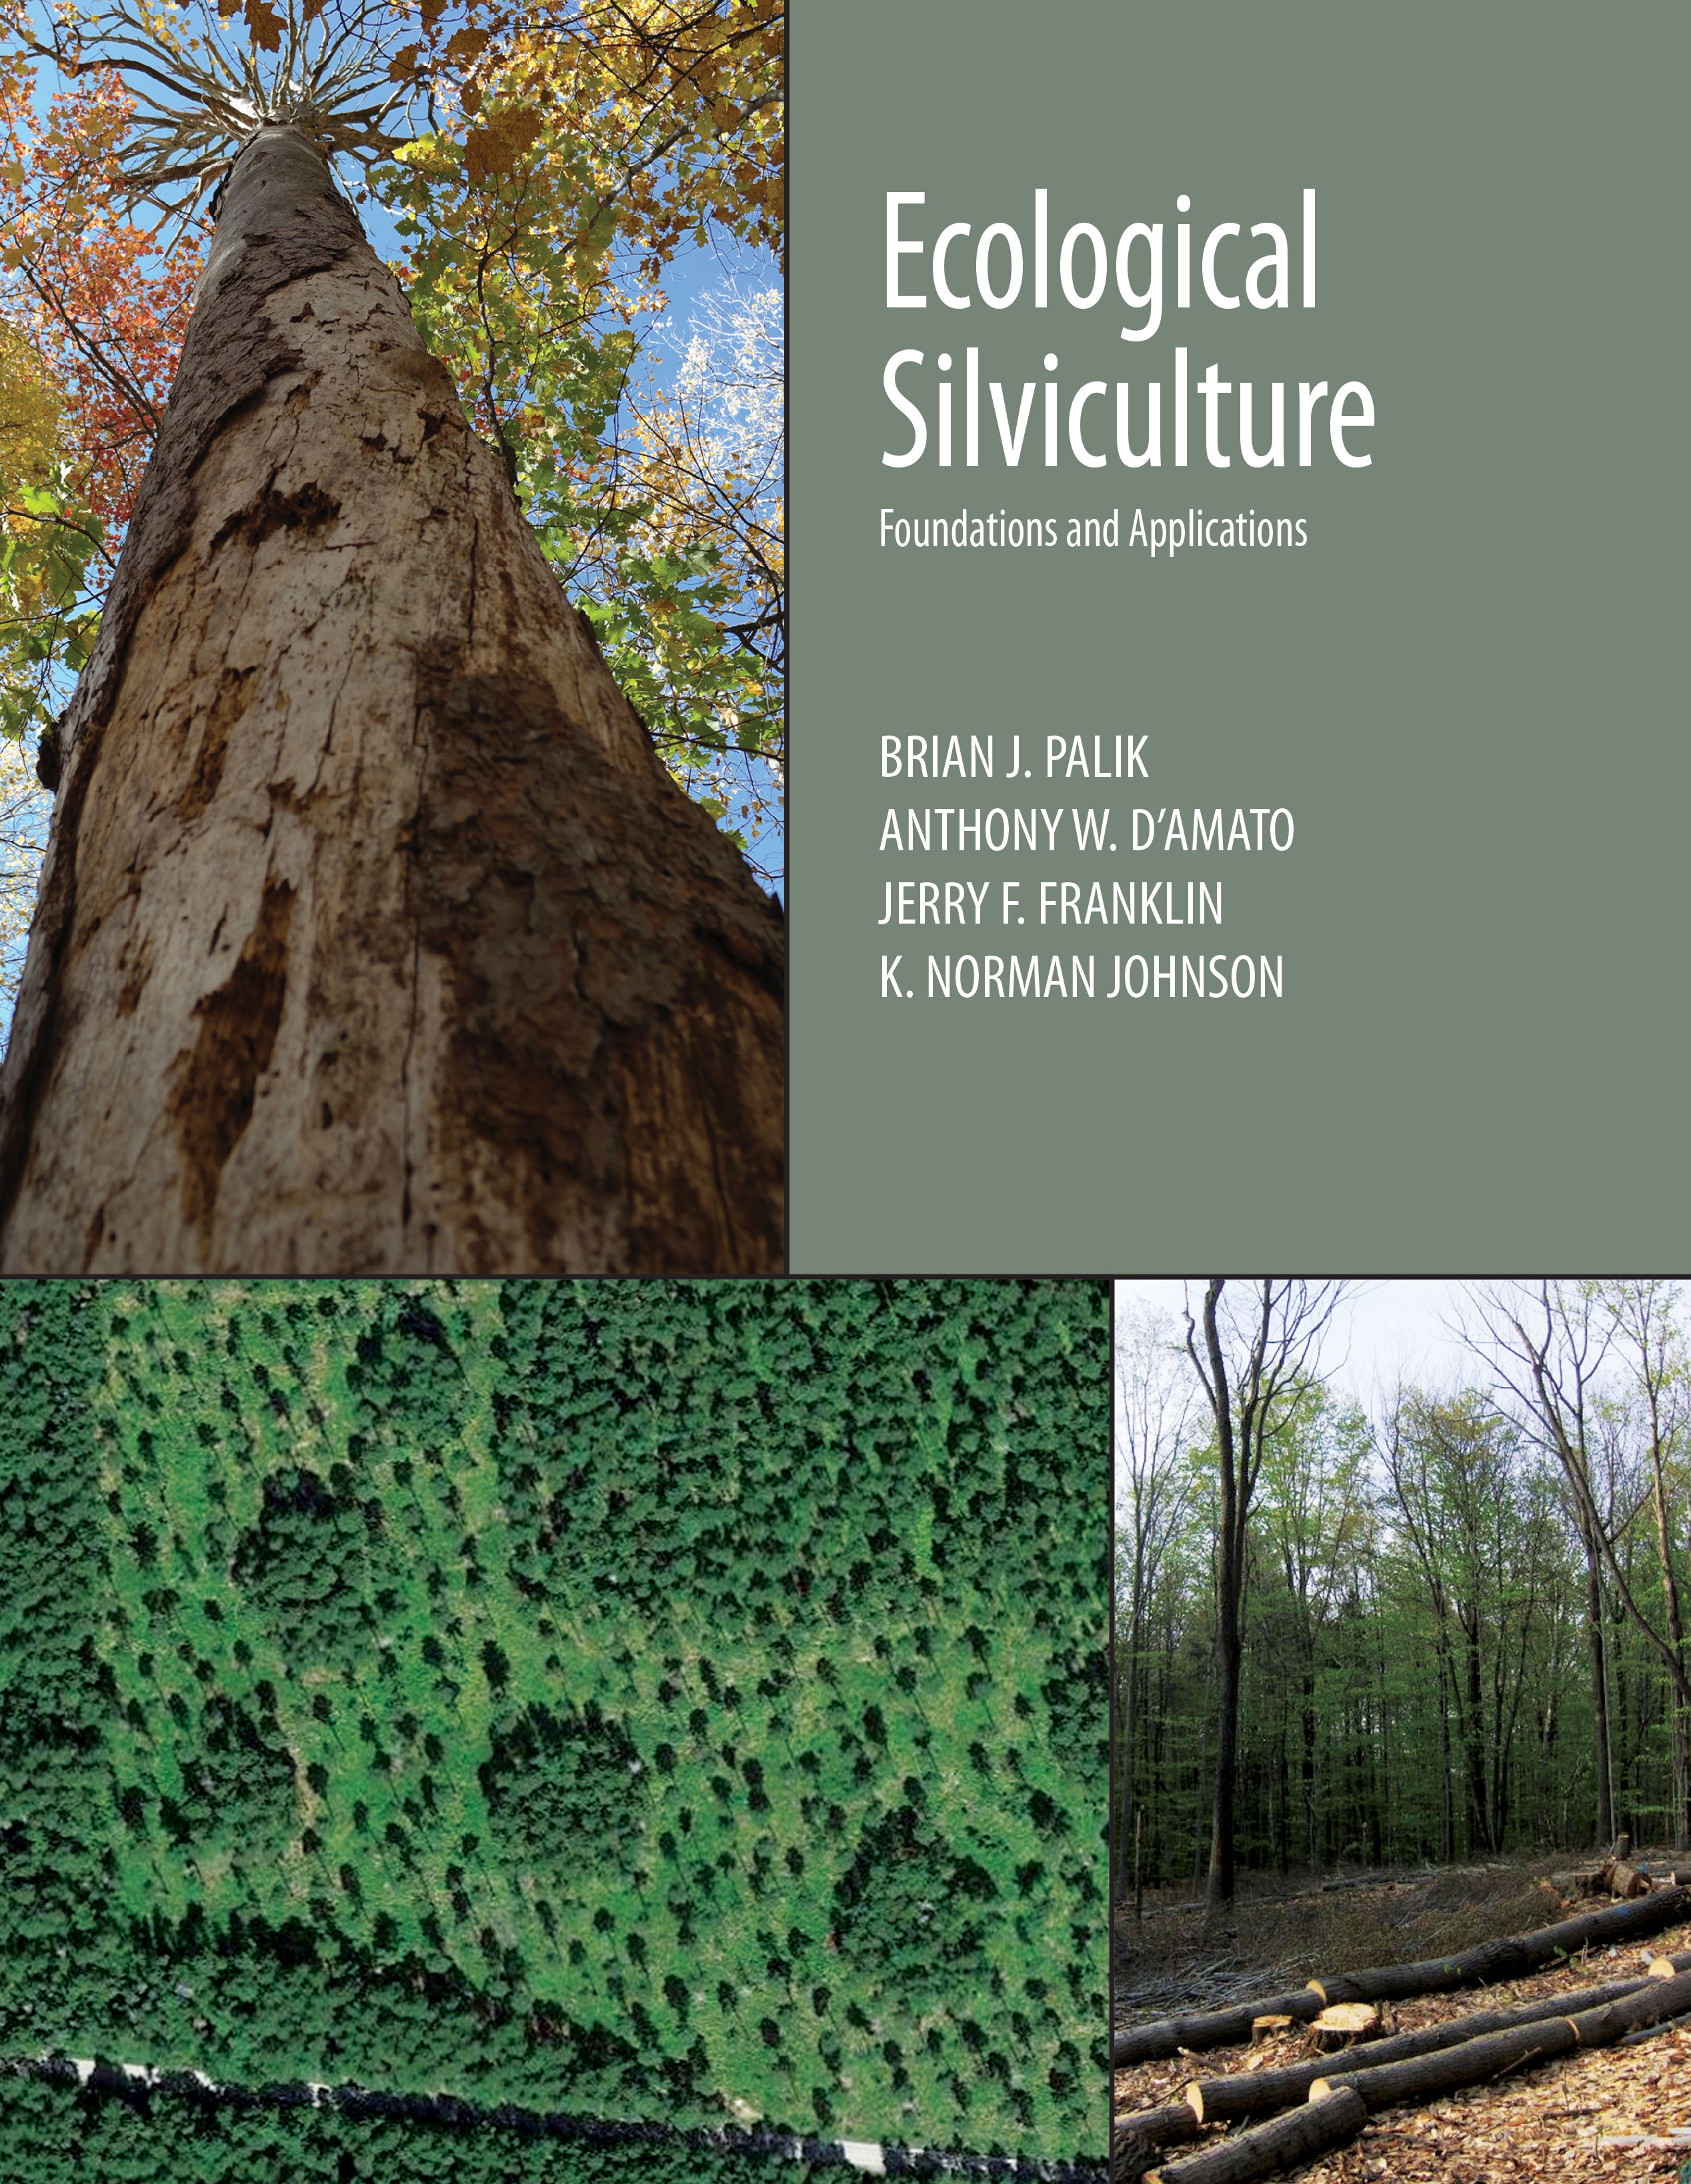 Ecological Silviculture: Foundations and Applications by Brian J. Palik, Anthony W. D